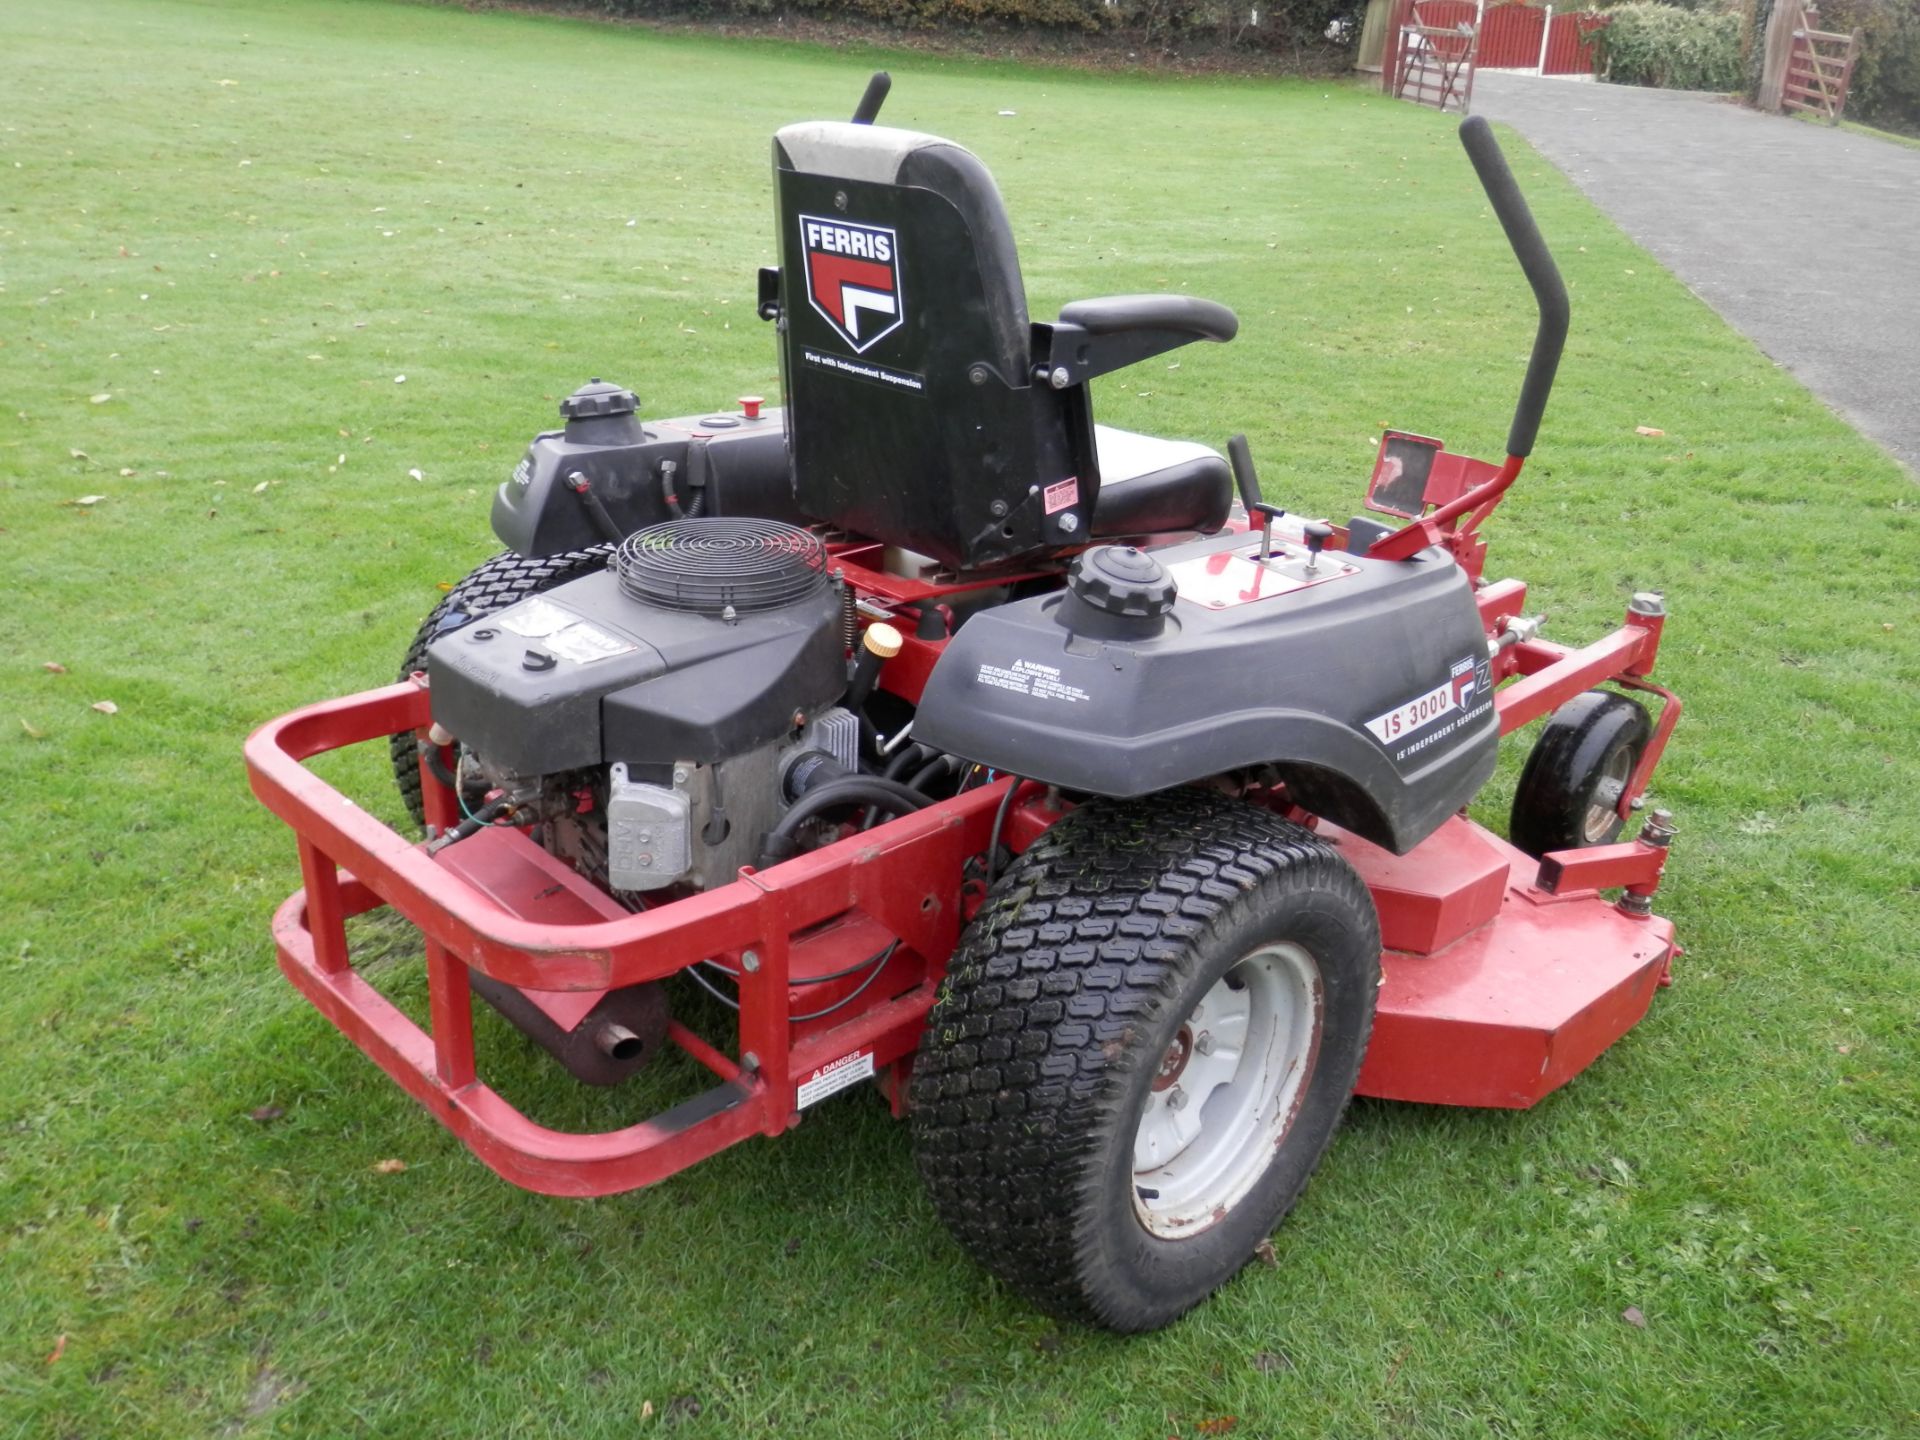 FULLY WORKING FERRIS IS3000 62" CUT RIDE ON ROTARY 25 BHP ENGINED RIDE ON MOWER. - Image 12 of 16